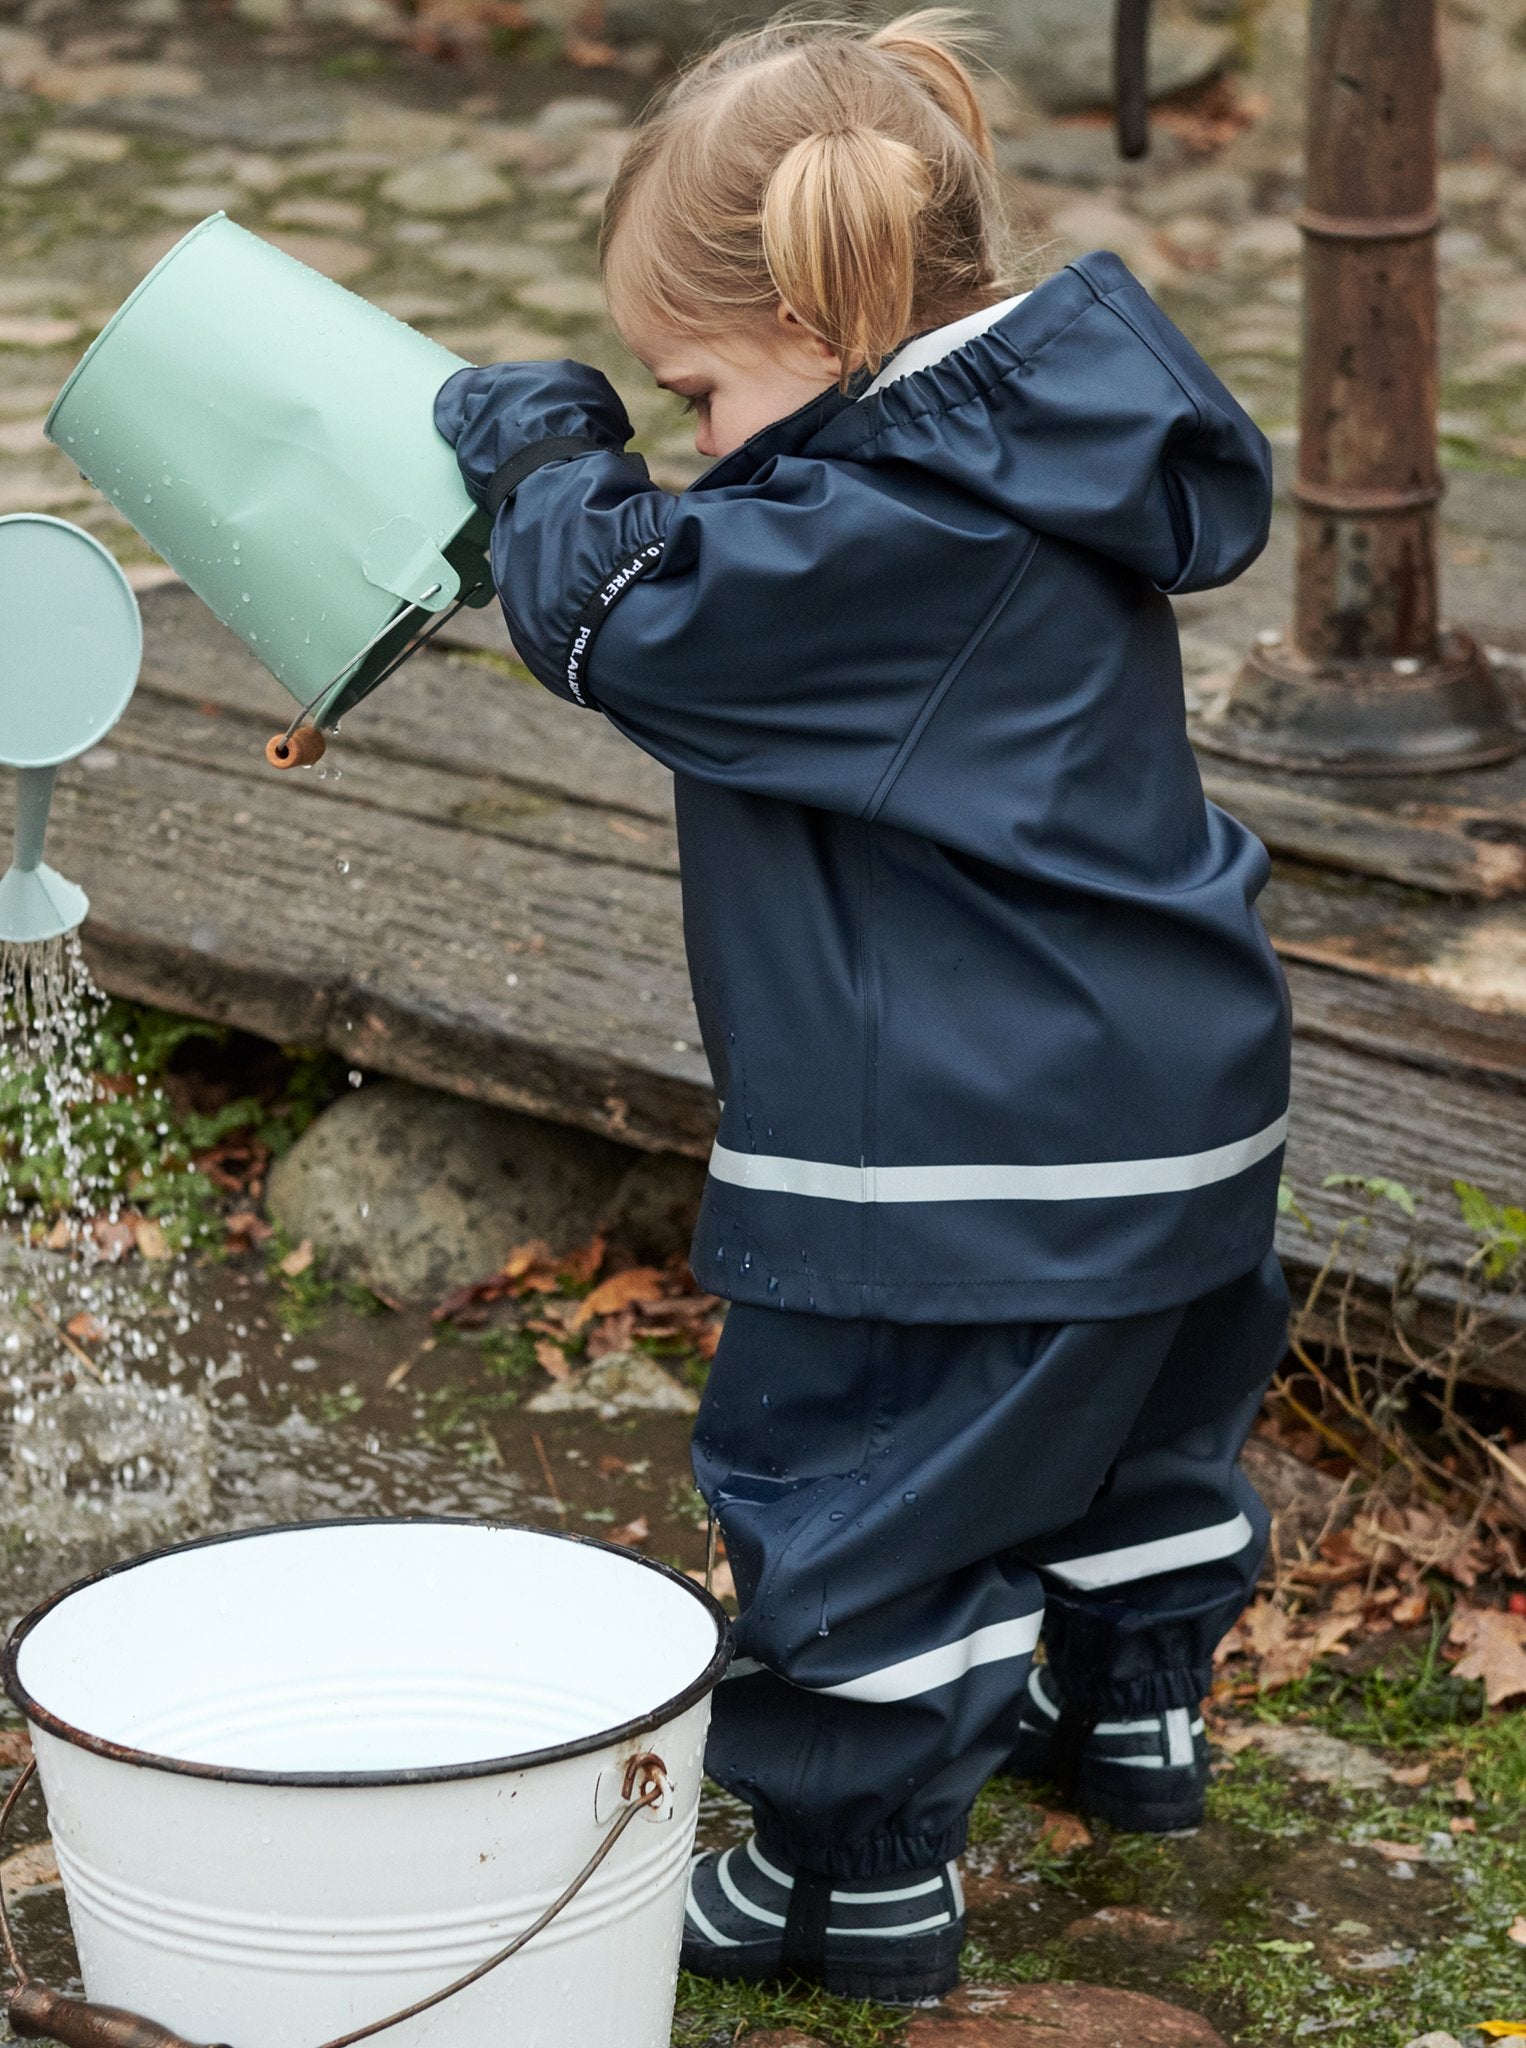 Kid playing in the puddle wearing a navy raincoat and kids wellies. Ethically made sturdy sole and has M3 reflective strips.